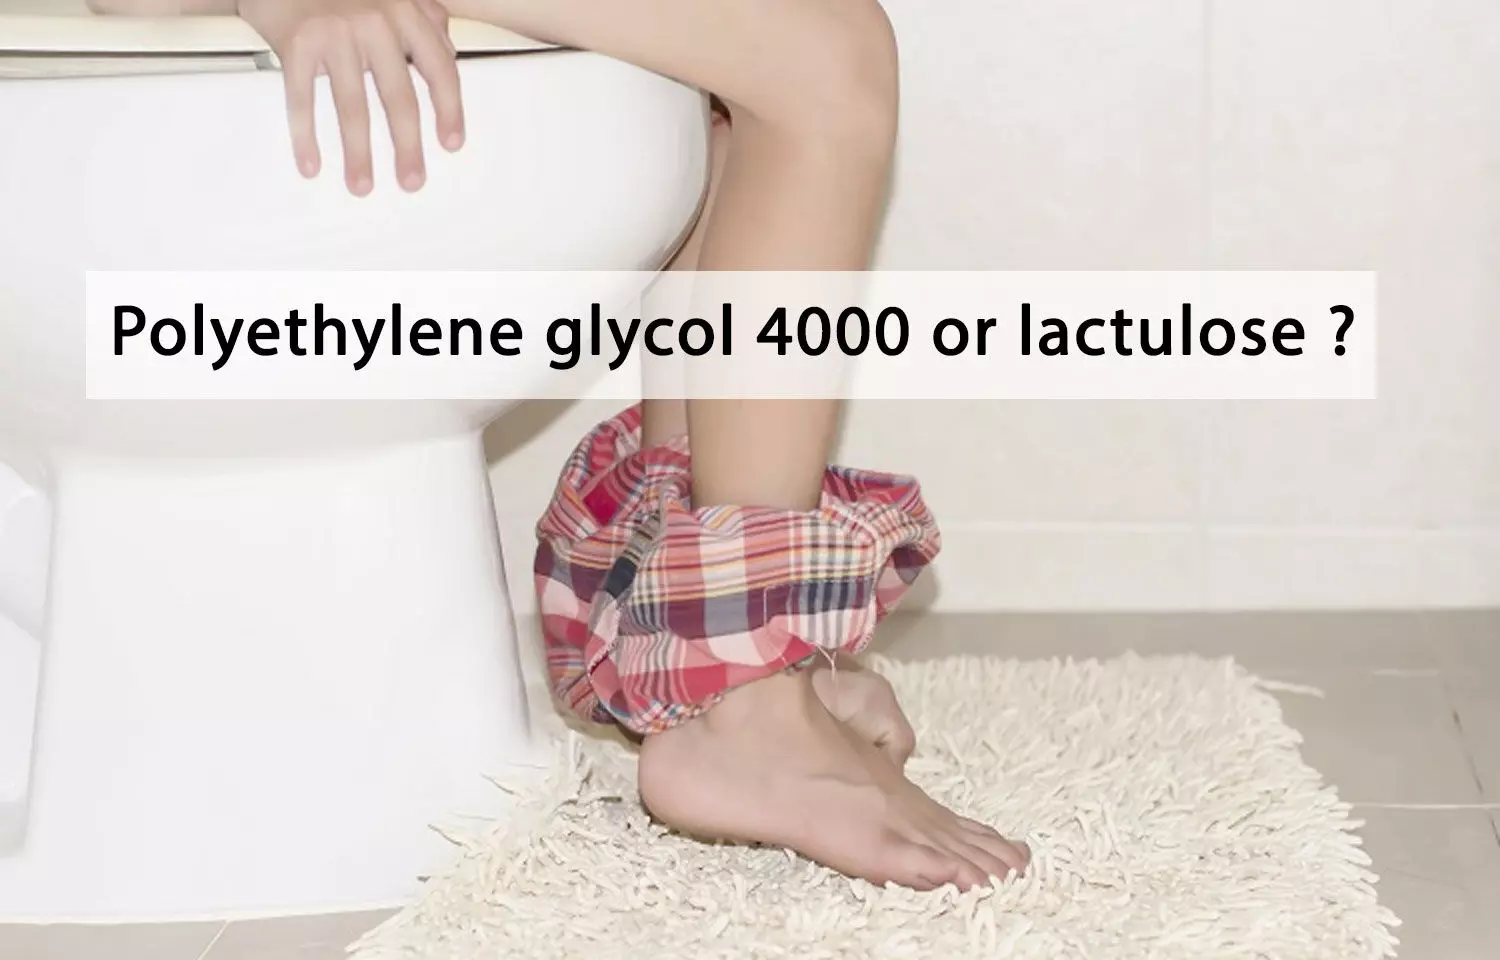 Evaluation of tolerance of polyethylene glycol 4000 (PEG 4000) versus lactulose in constipated children